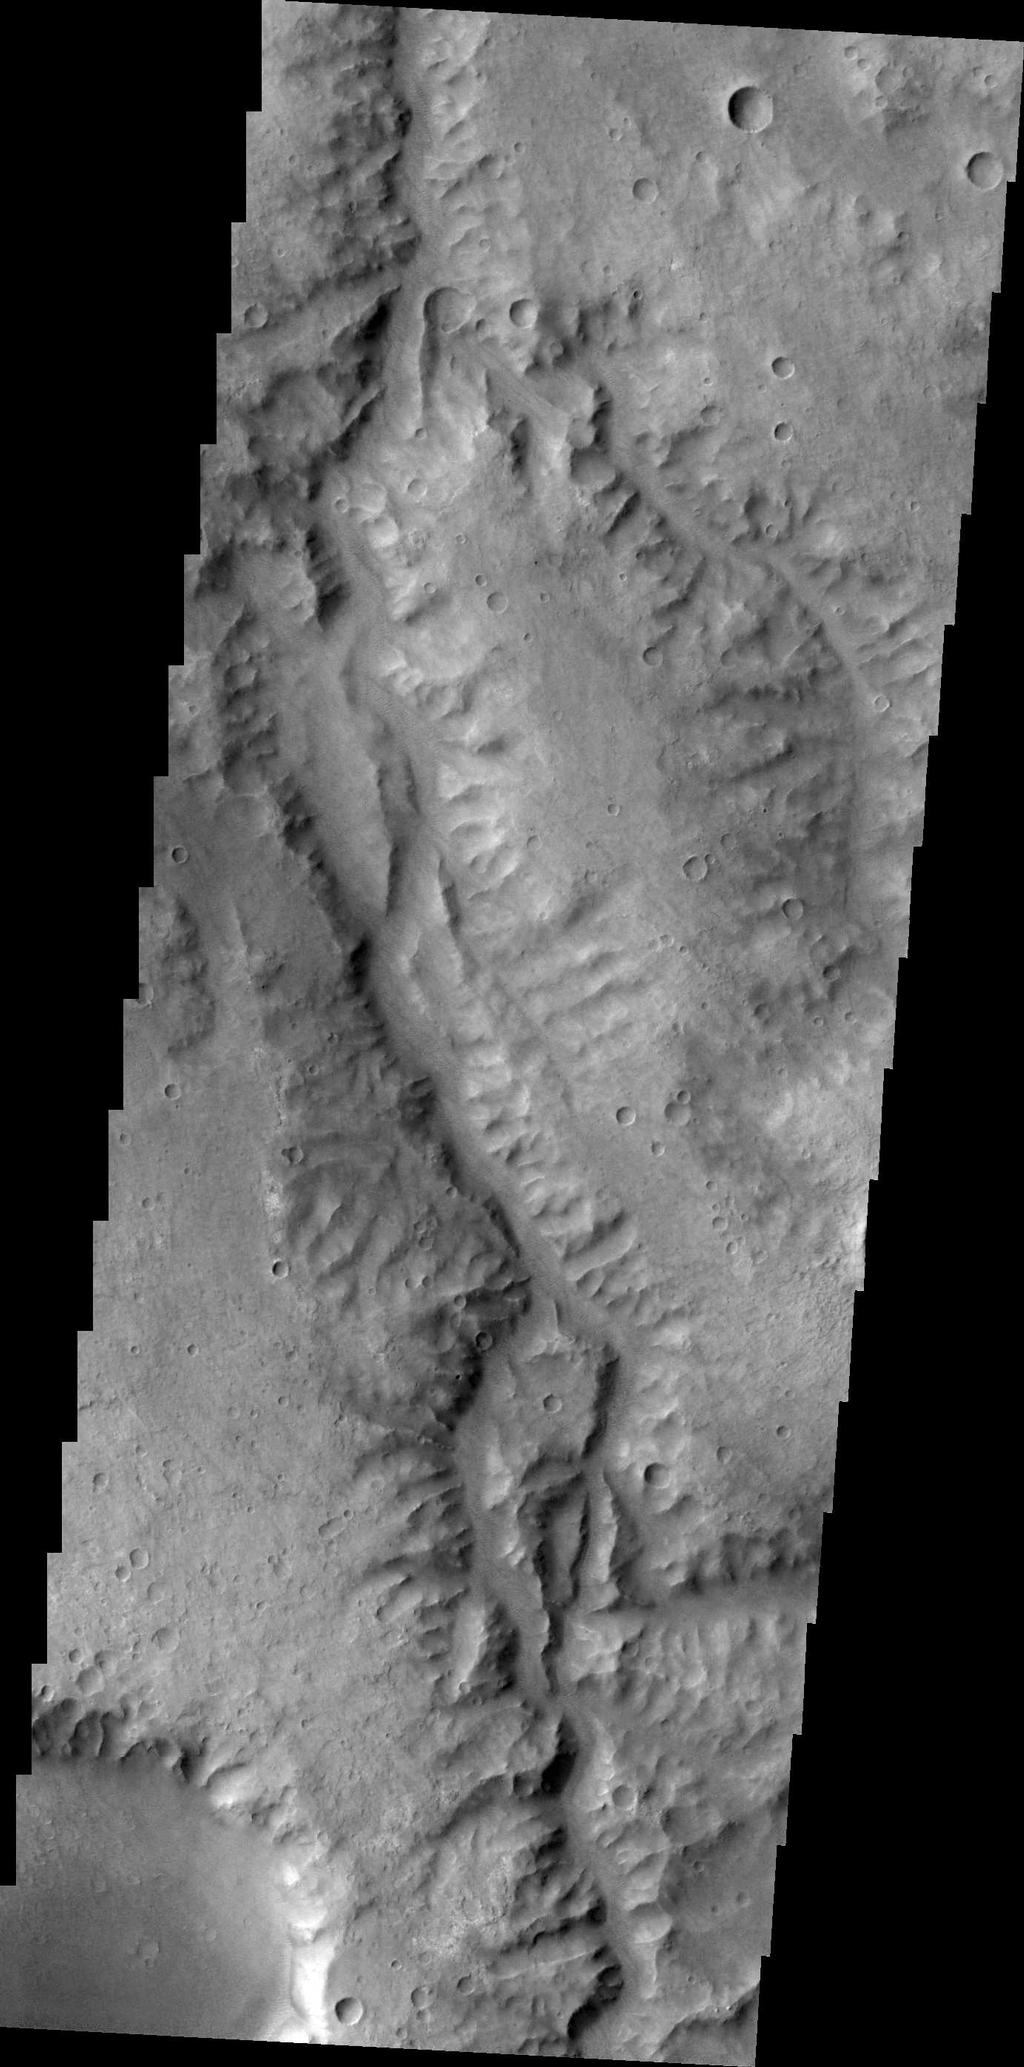 This unnamed channel drains part of Margaritifer Terra.